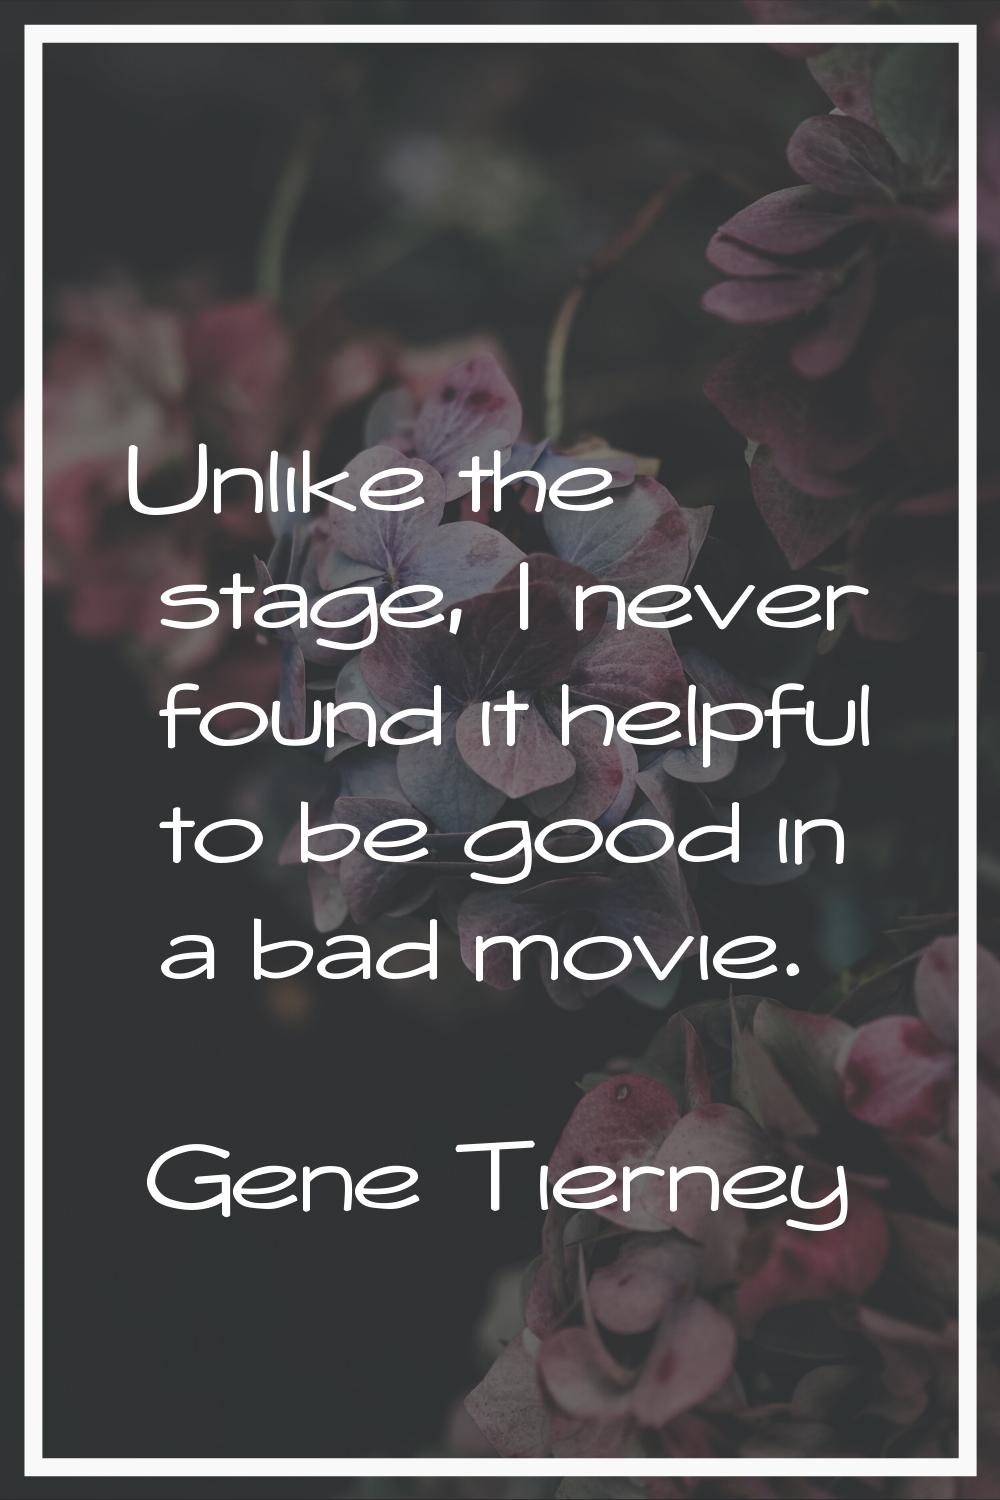 Unlike the stage, I never found it helpful to be good in a bad movie.